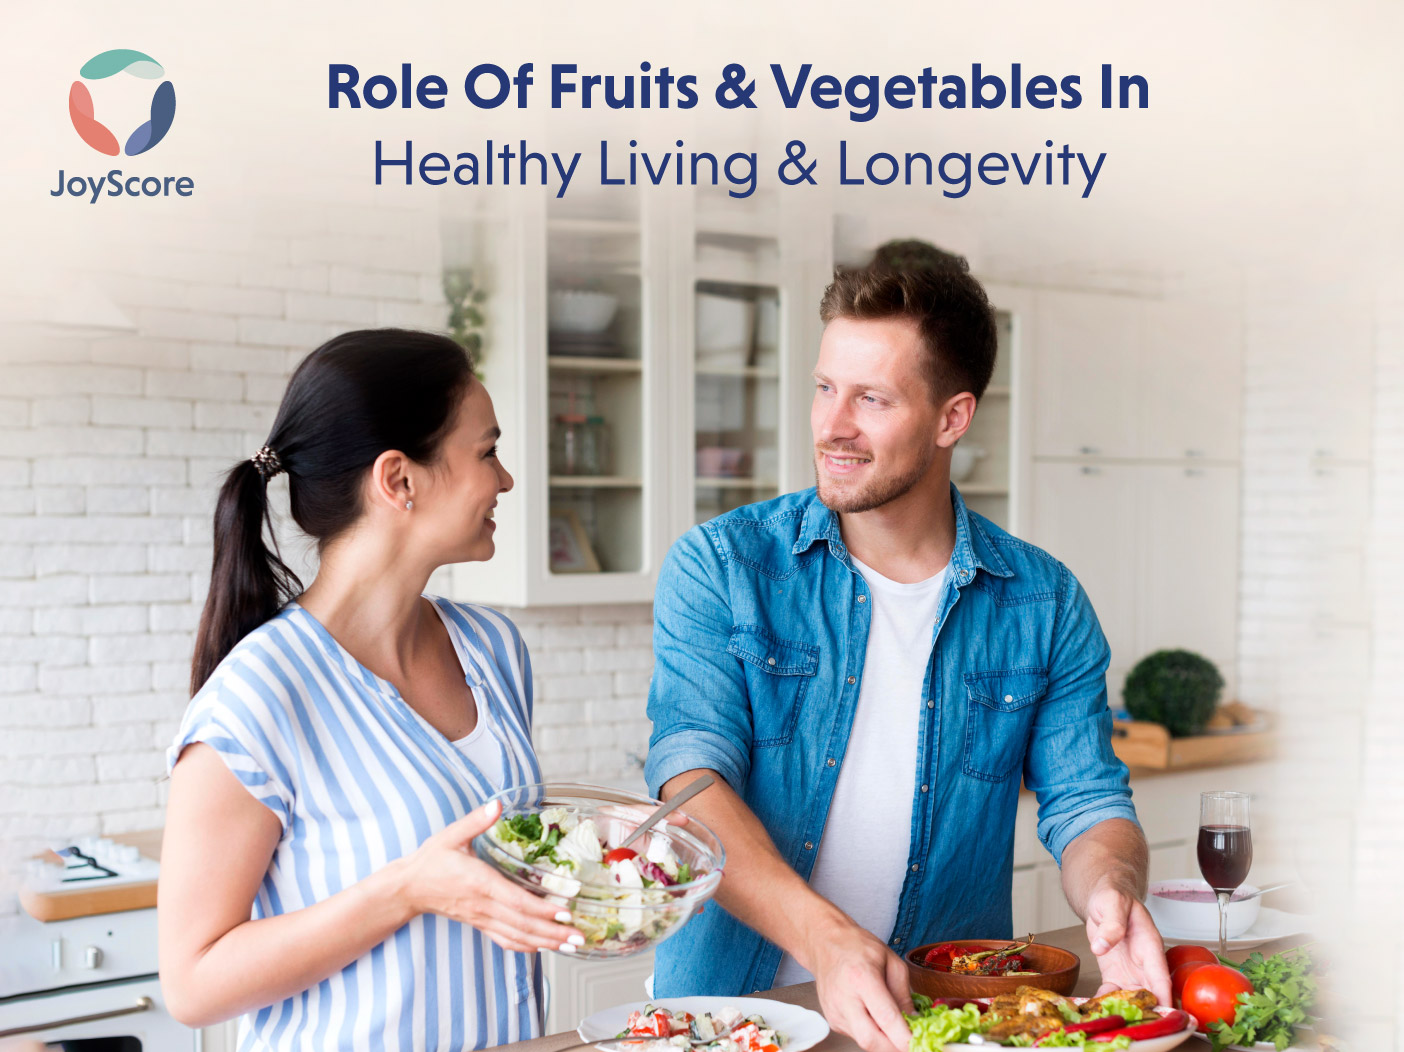 Role of Fruits and Vegetables in Healthy Living and Longevity - JoyScore: The Joy Of Self Care